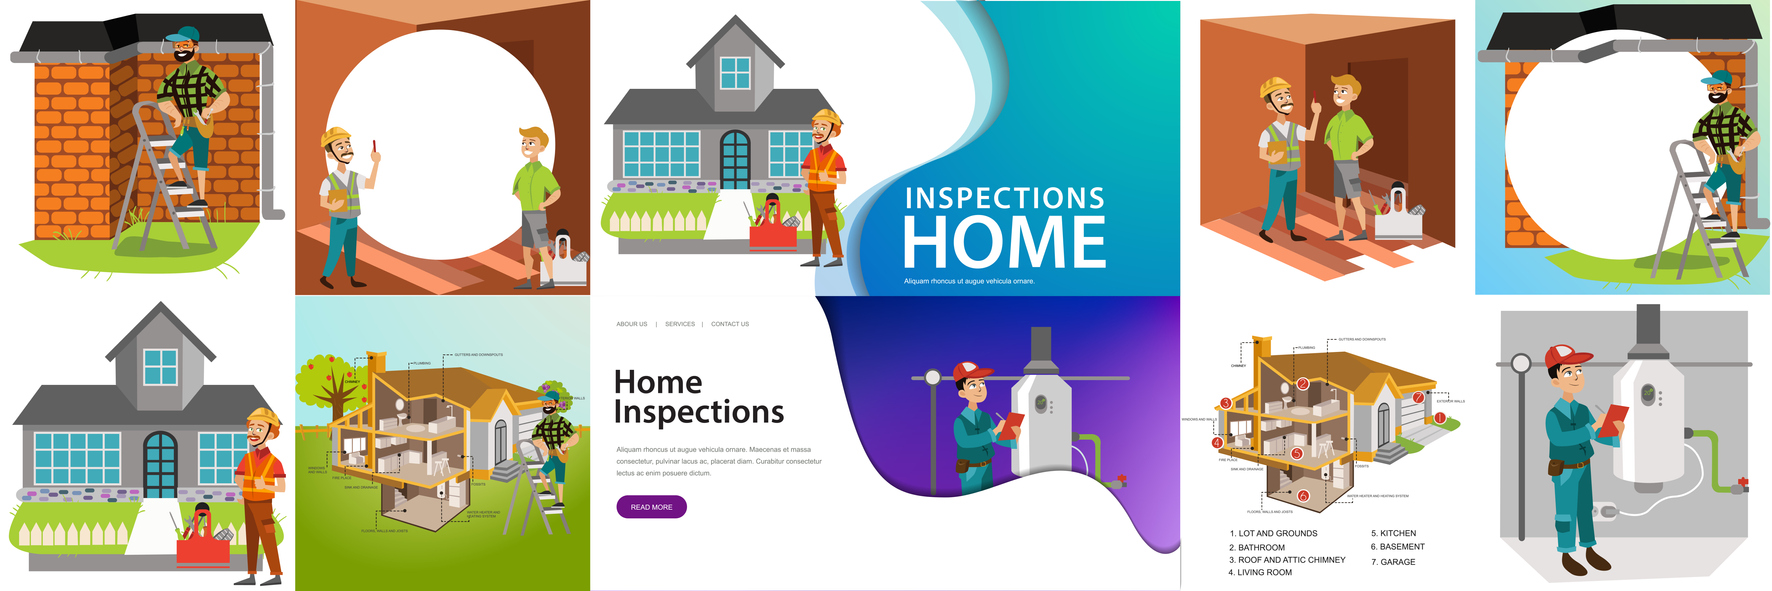 Home Inspections: Demystifying Misconceptions and Recognizing True Deal Breakers